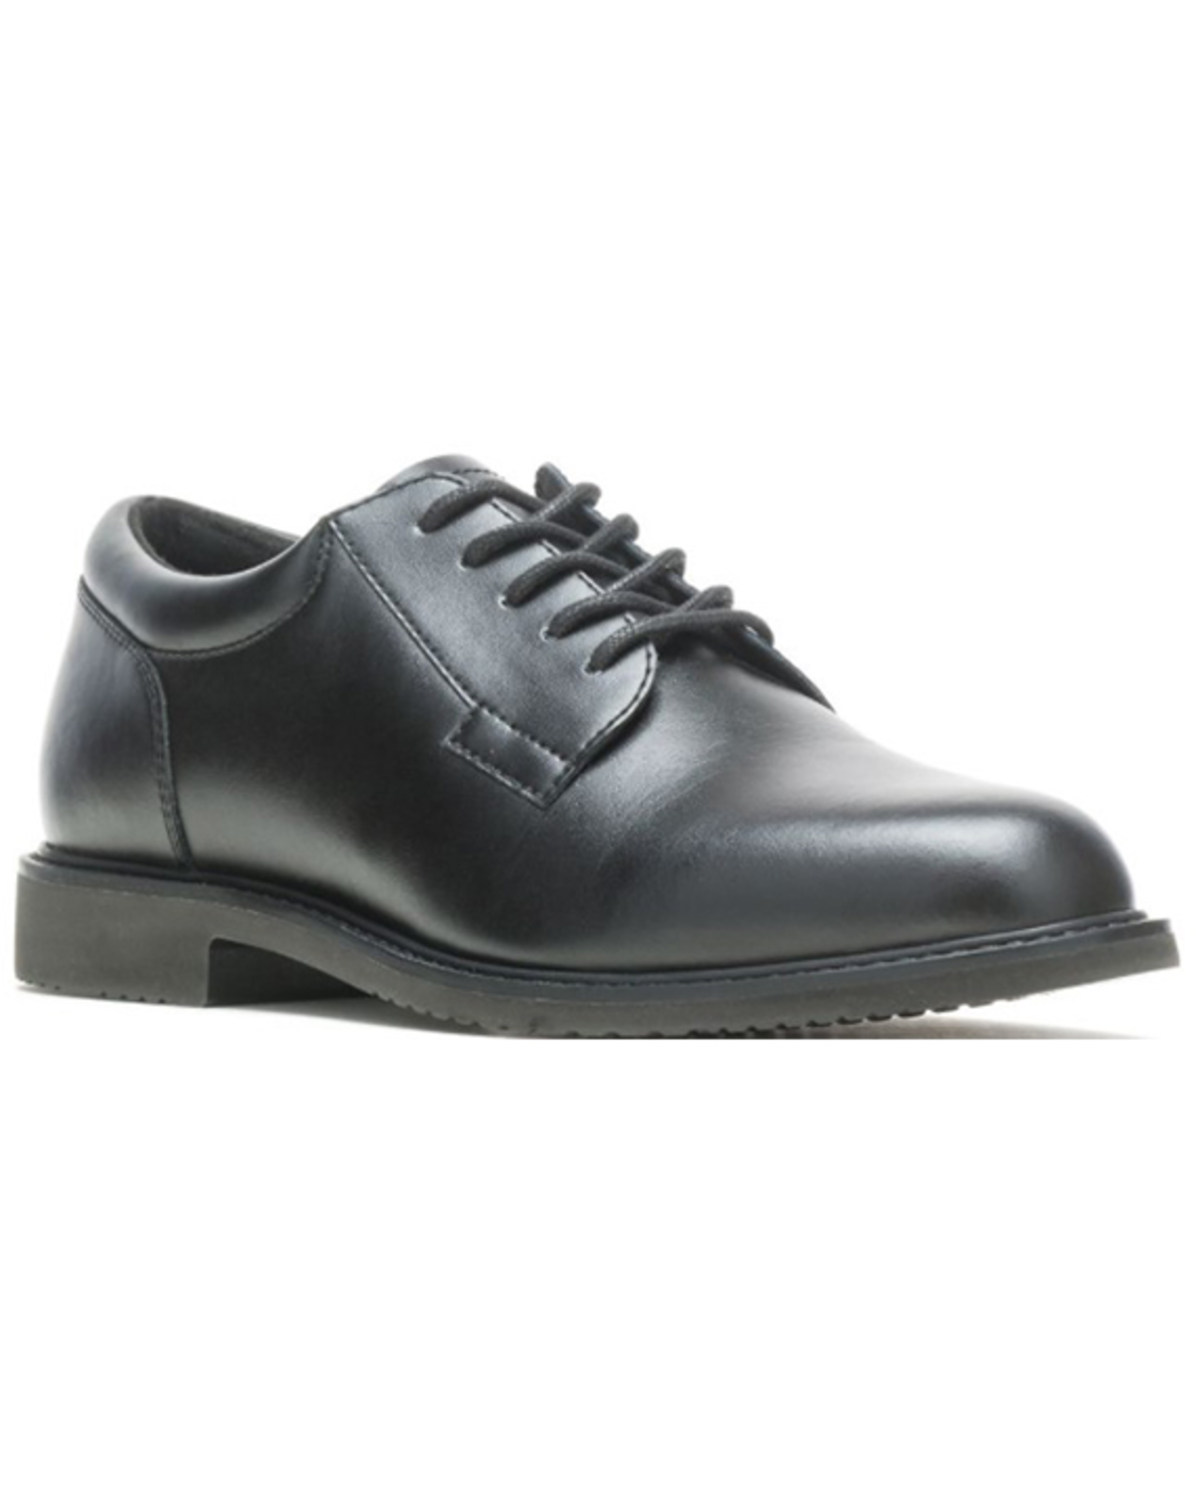 Bates Men's Sentry High Shine LUX Lace-Up Work Oxford Shoes - Round Toe